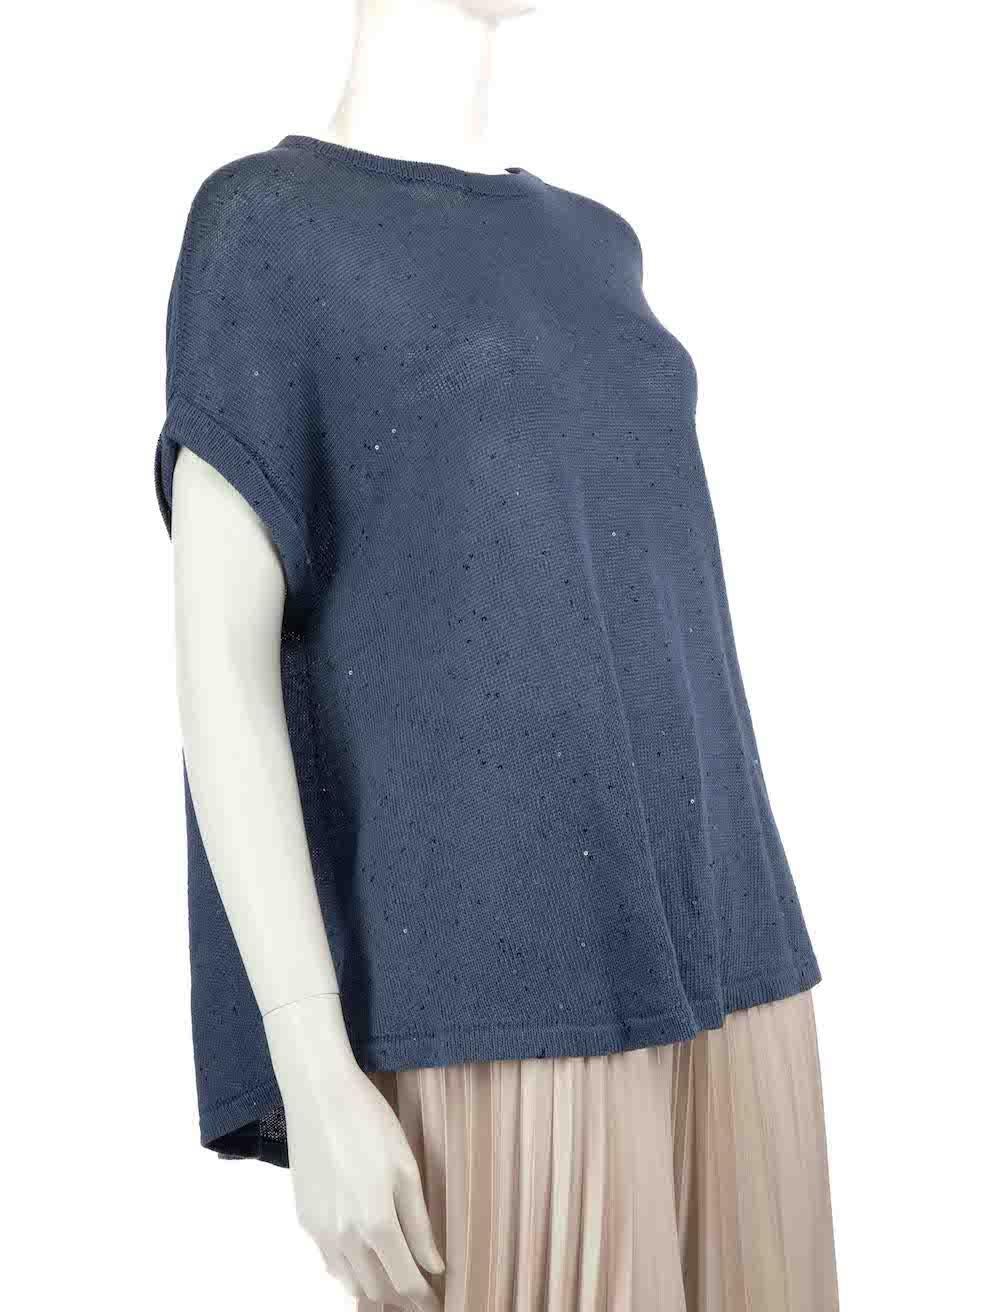 CONDITION is Very good. Minimal wear to jumper is evident. Some light discolouration around neckline and the brand label is missing on this used Brunello Cucinelli designer resale item.
 
 
 
 Details
 
 
 Blue
 
 Linen
 
 Short sleeves top
 
